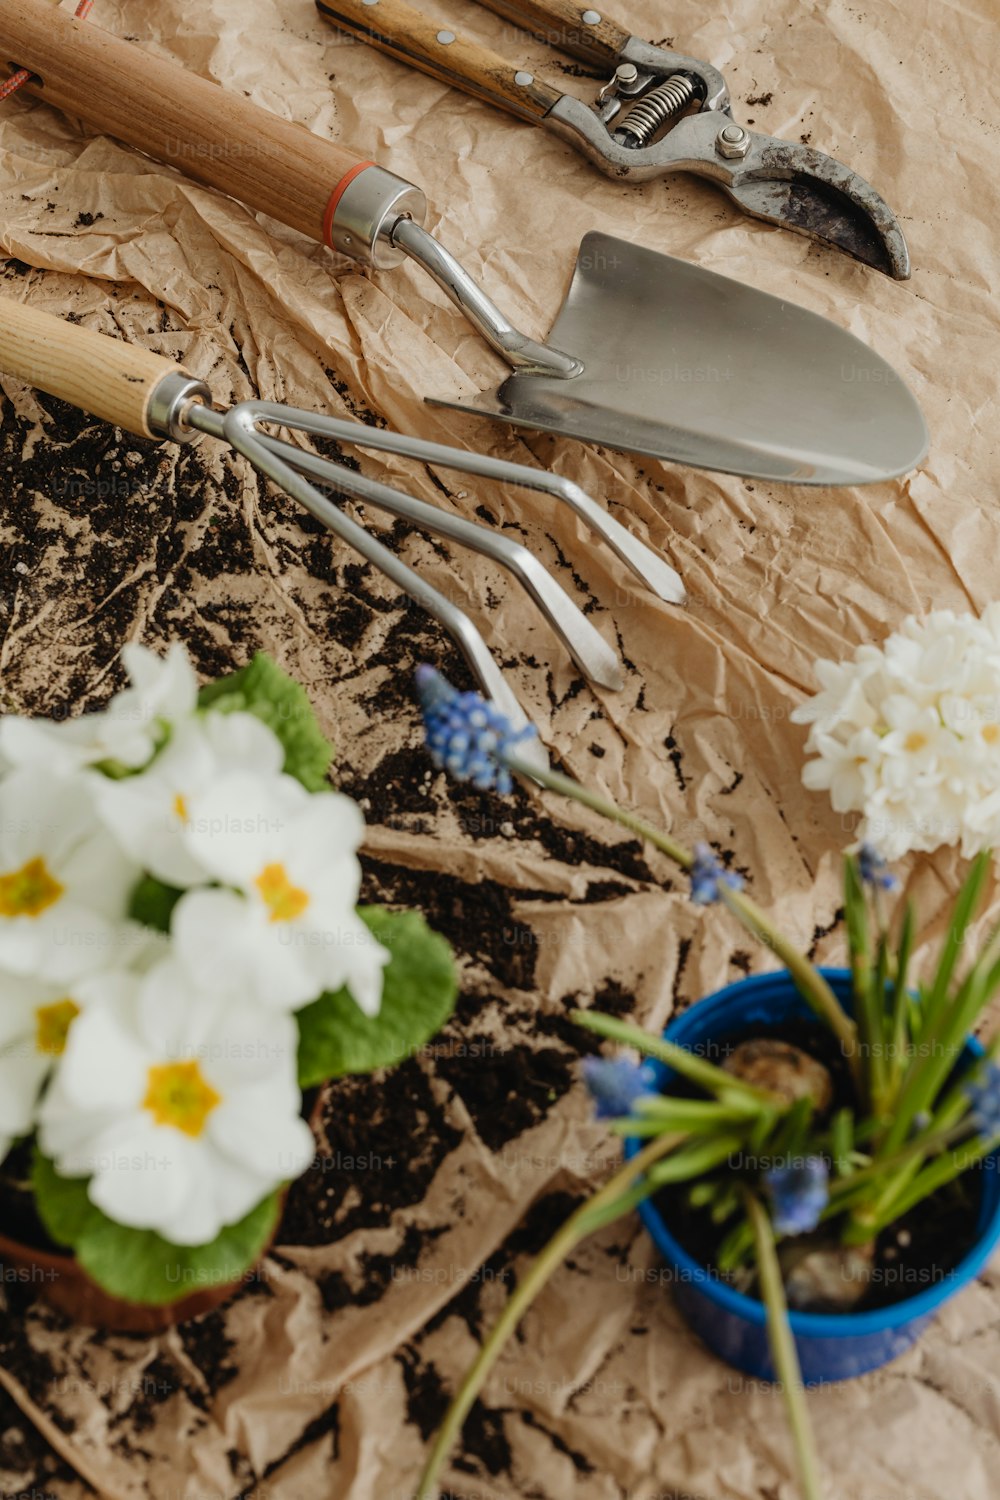 a potted plant with white flowers and gardening utensils